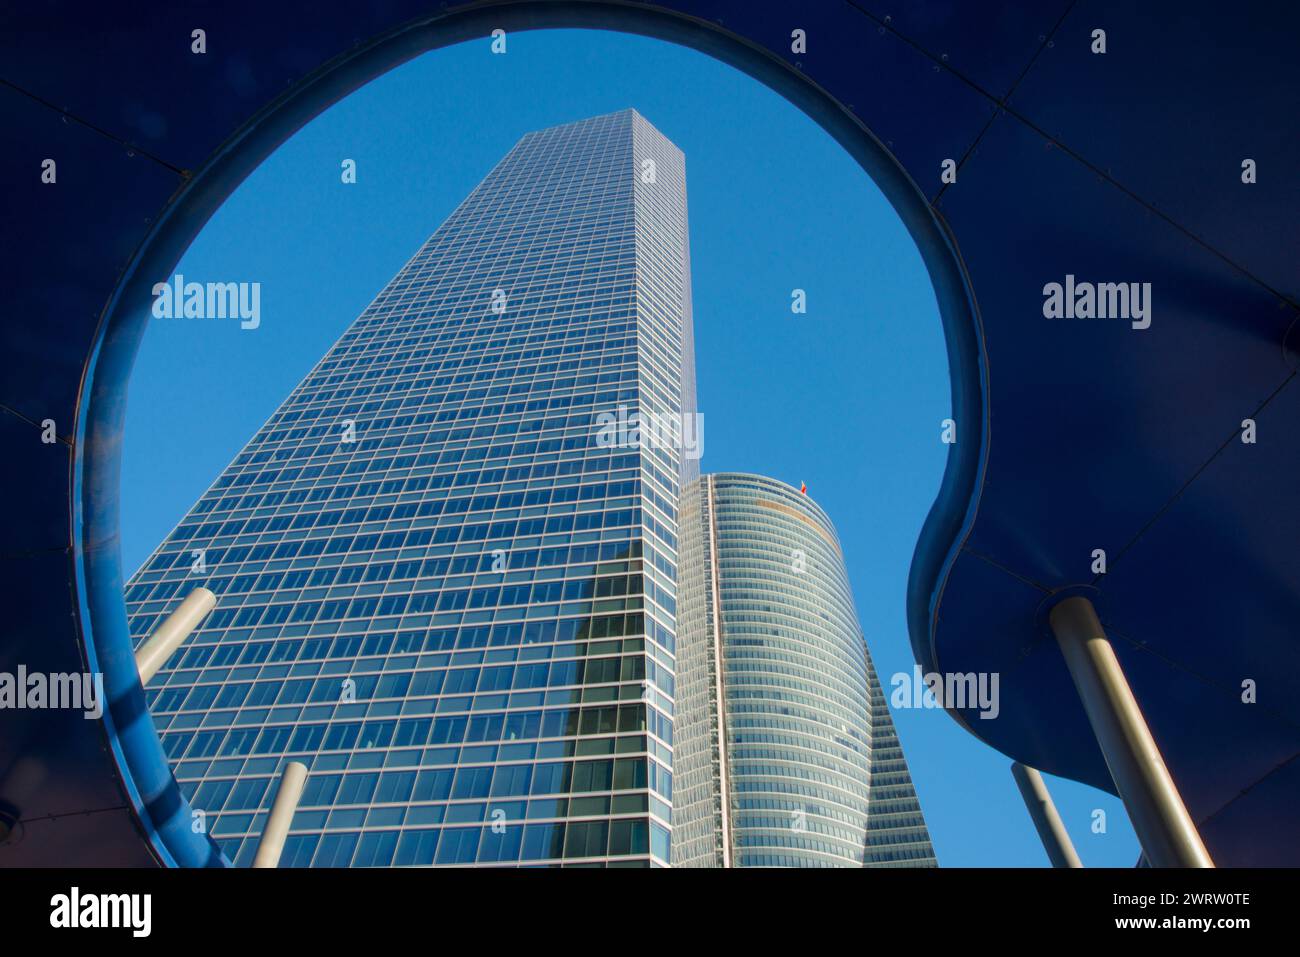 Cristal Tower and Espacio Tower, view from below a modern sculpture. CTBA, Madrid, Spain. Stock Photo